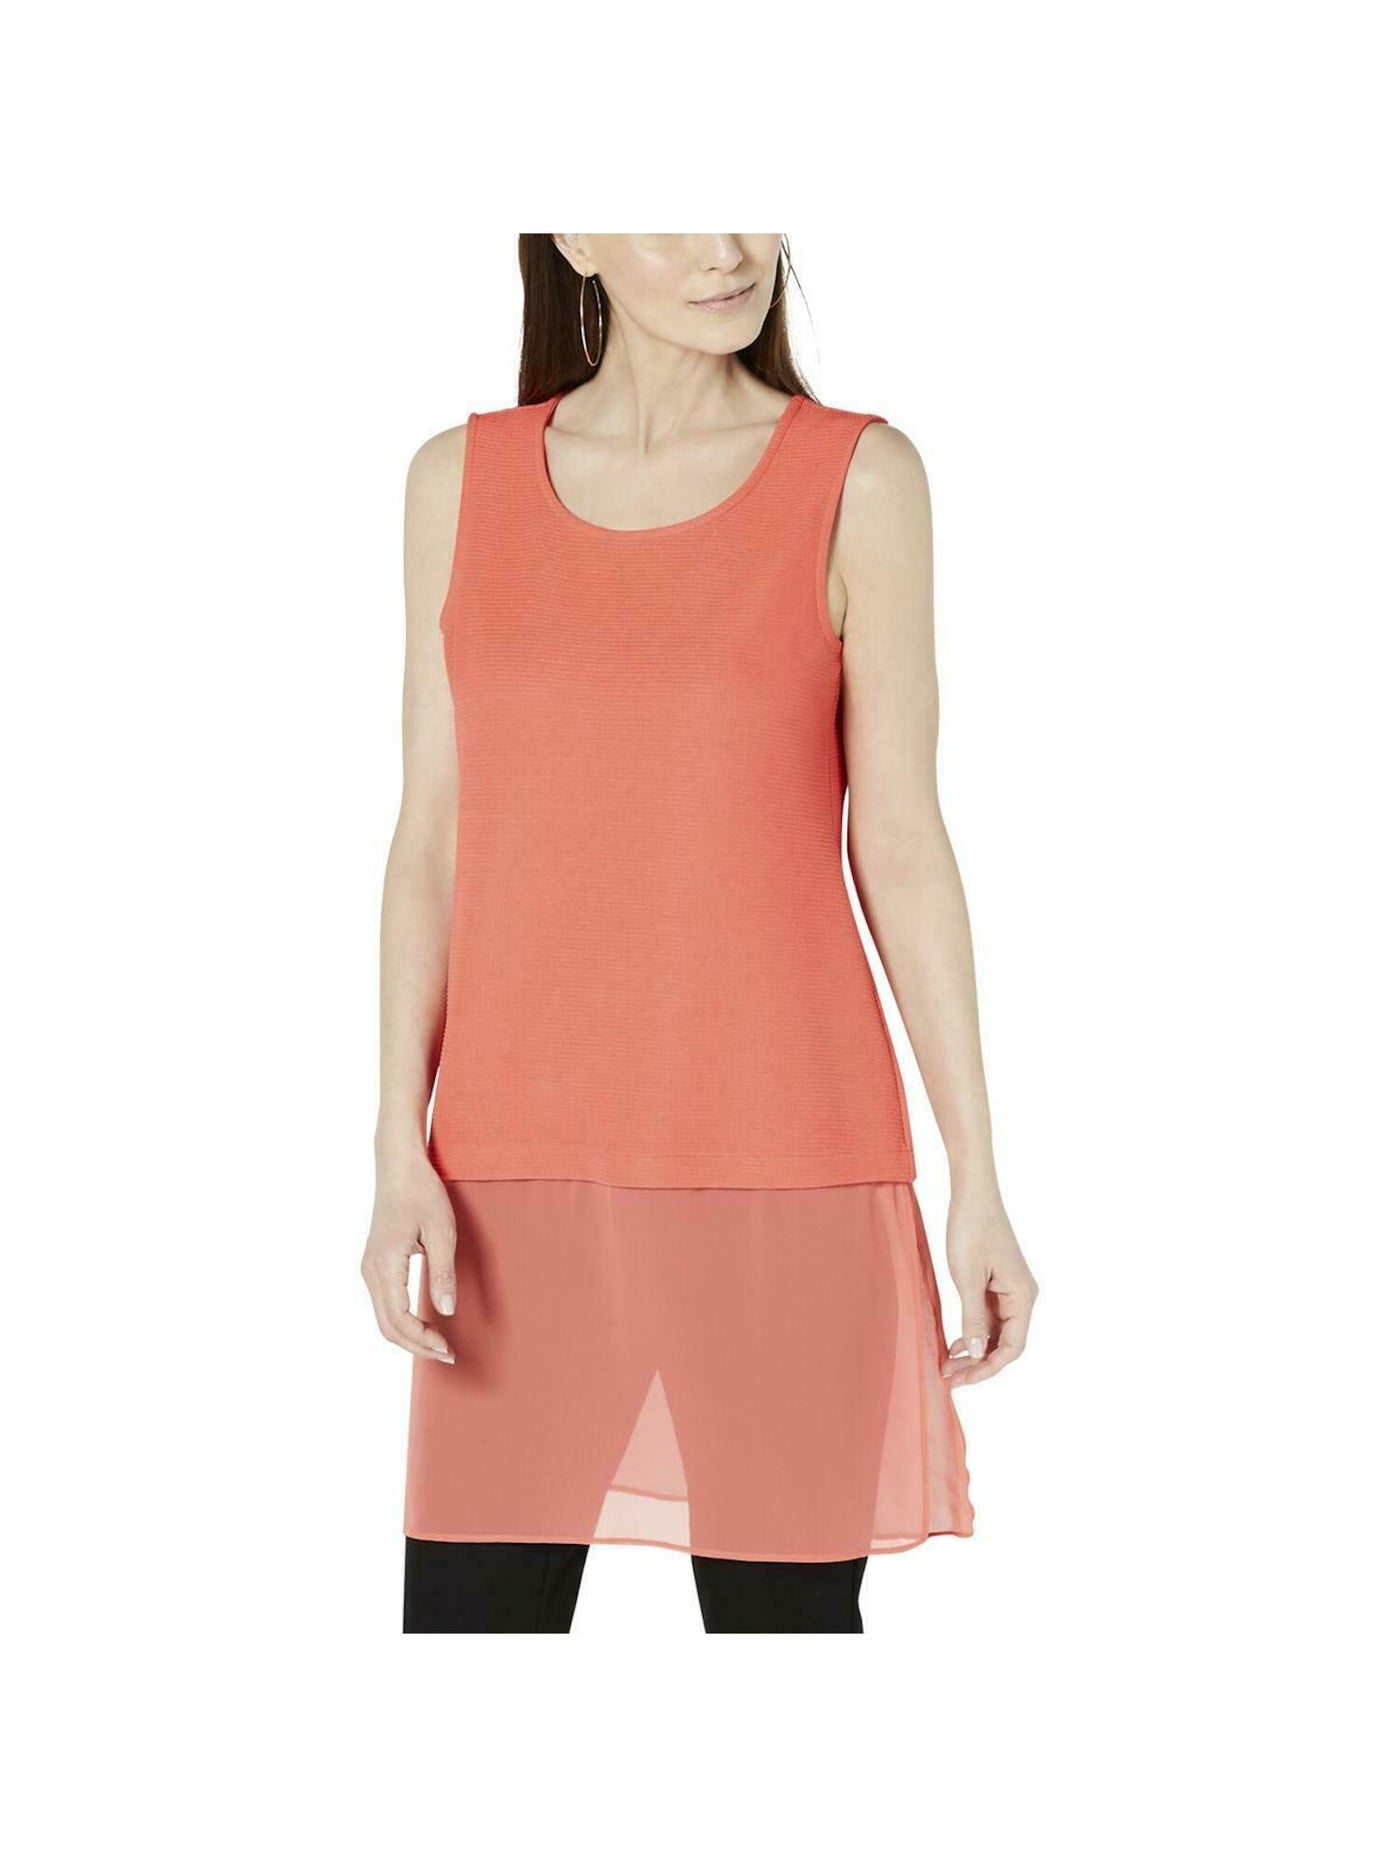 ALFANI Womens Coral Layered-look Sleeveless Scoop Neck Party Tunic Top Petites PM